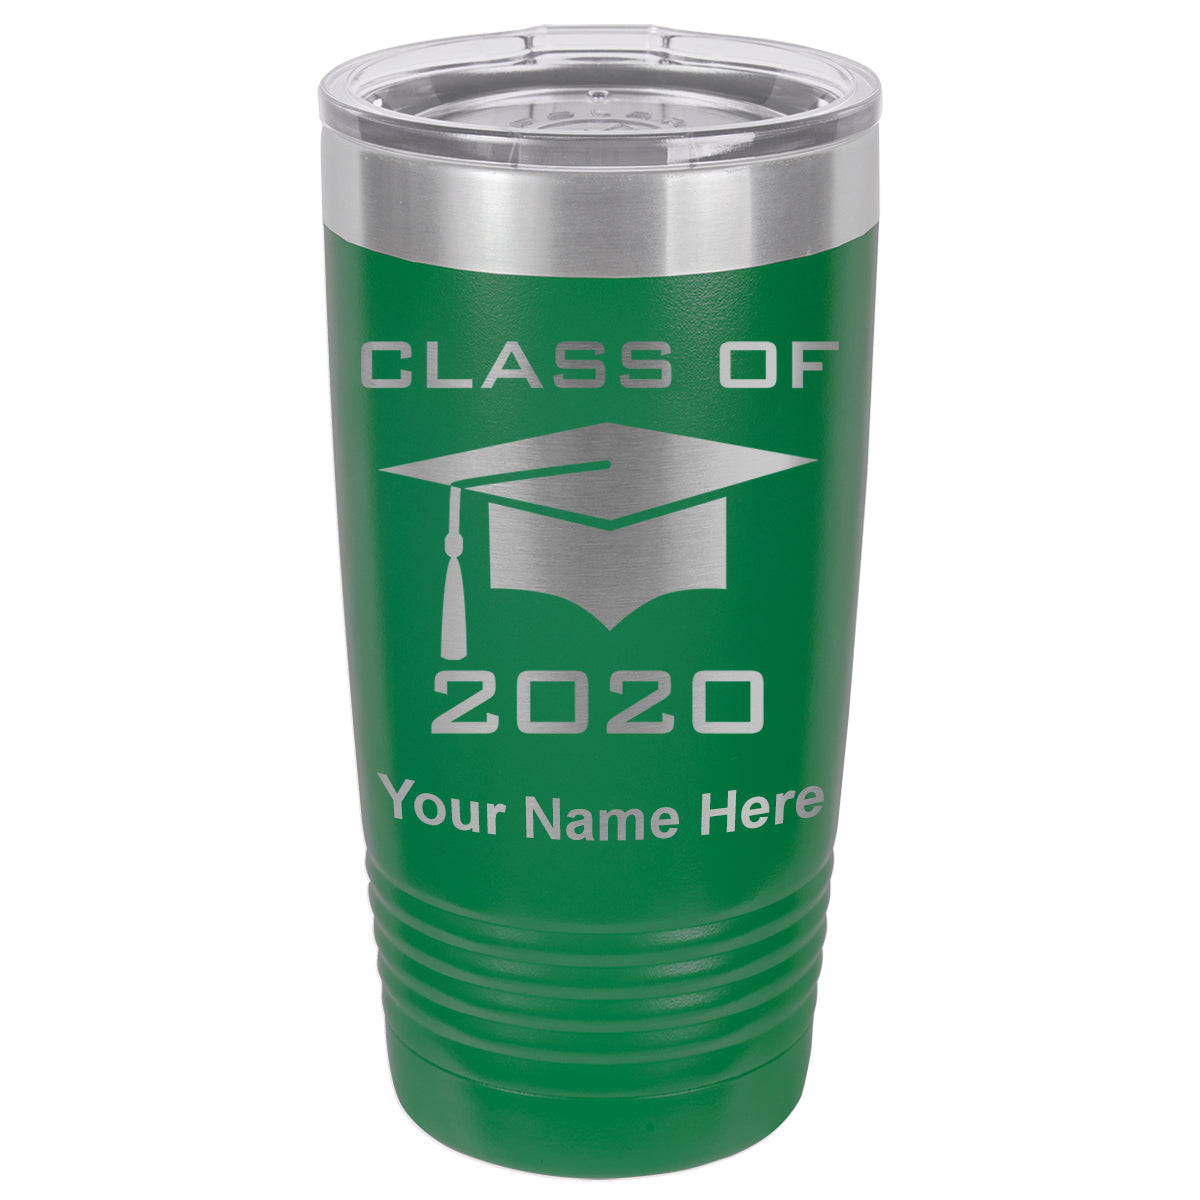 20oz Vacuum Insulated Tumbler Mug, Grad Cap Class of 2020, 2021, 2022, 2023 2024, 2025, Personalized Engraving Included